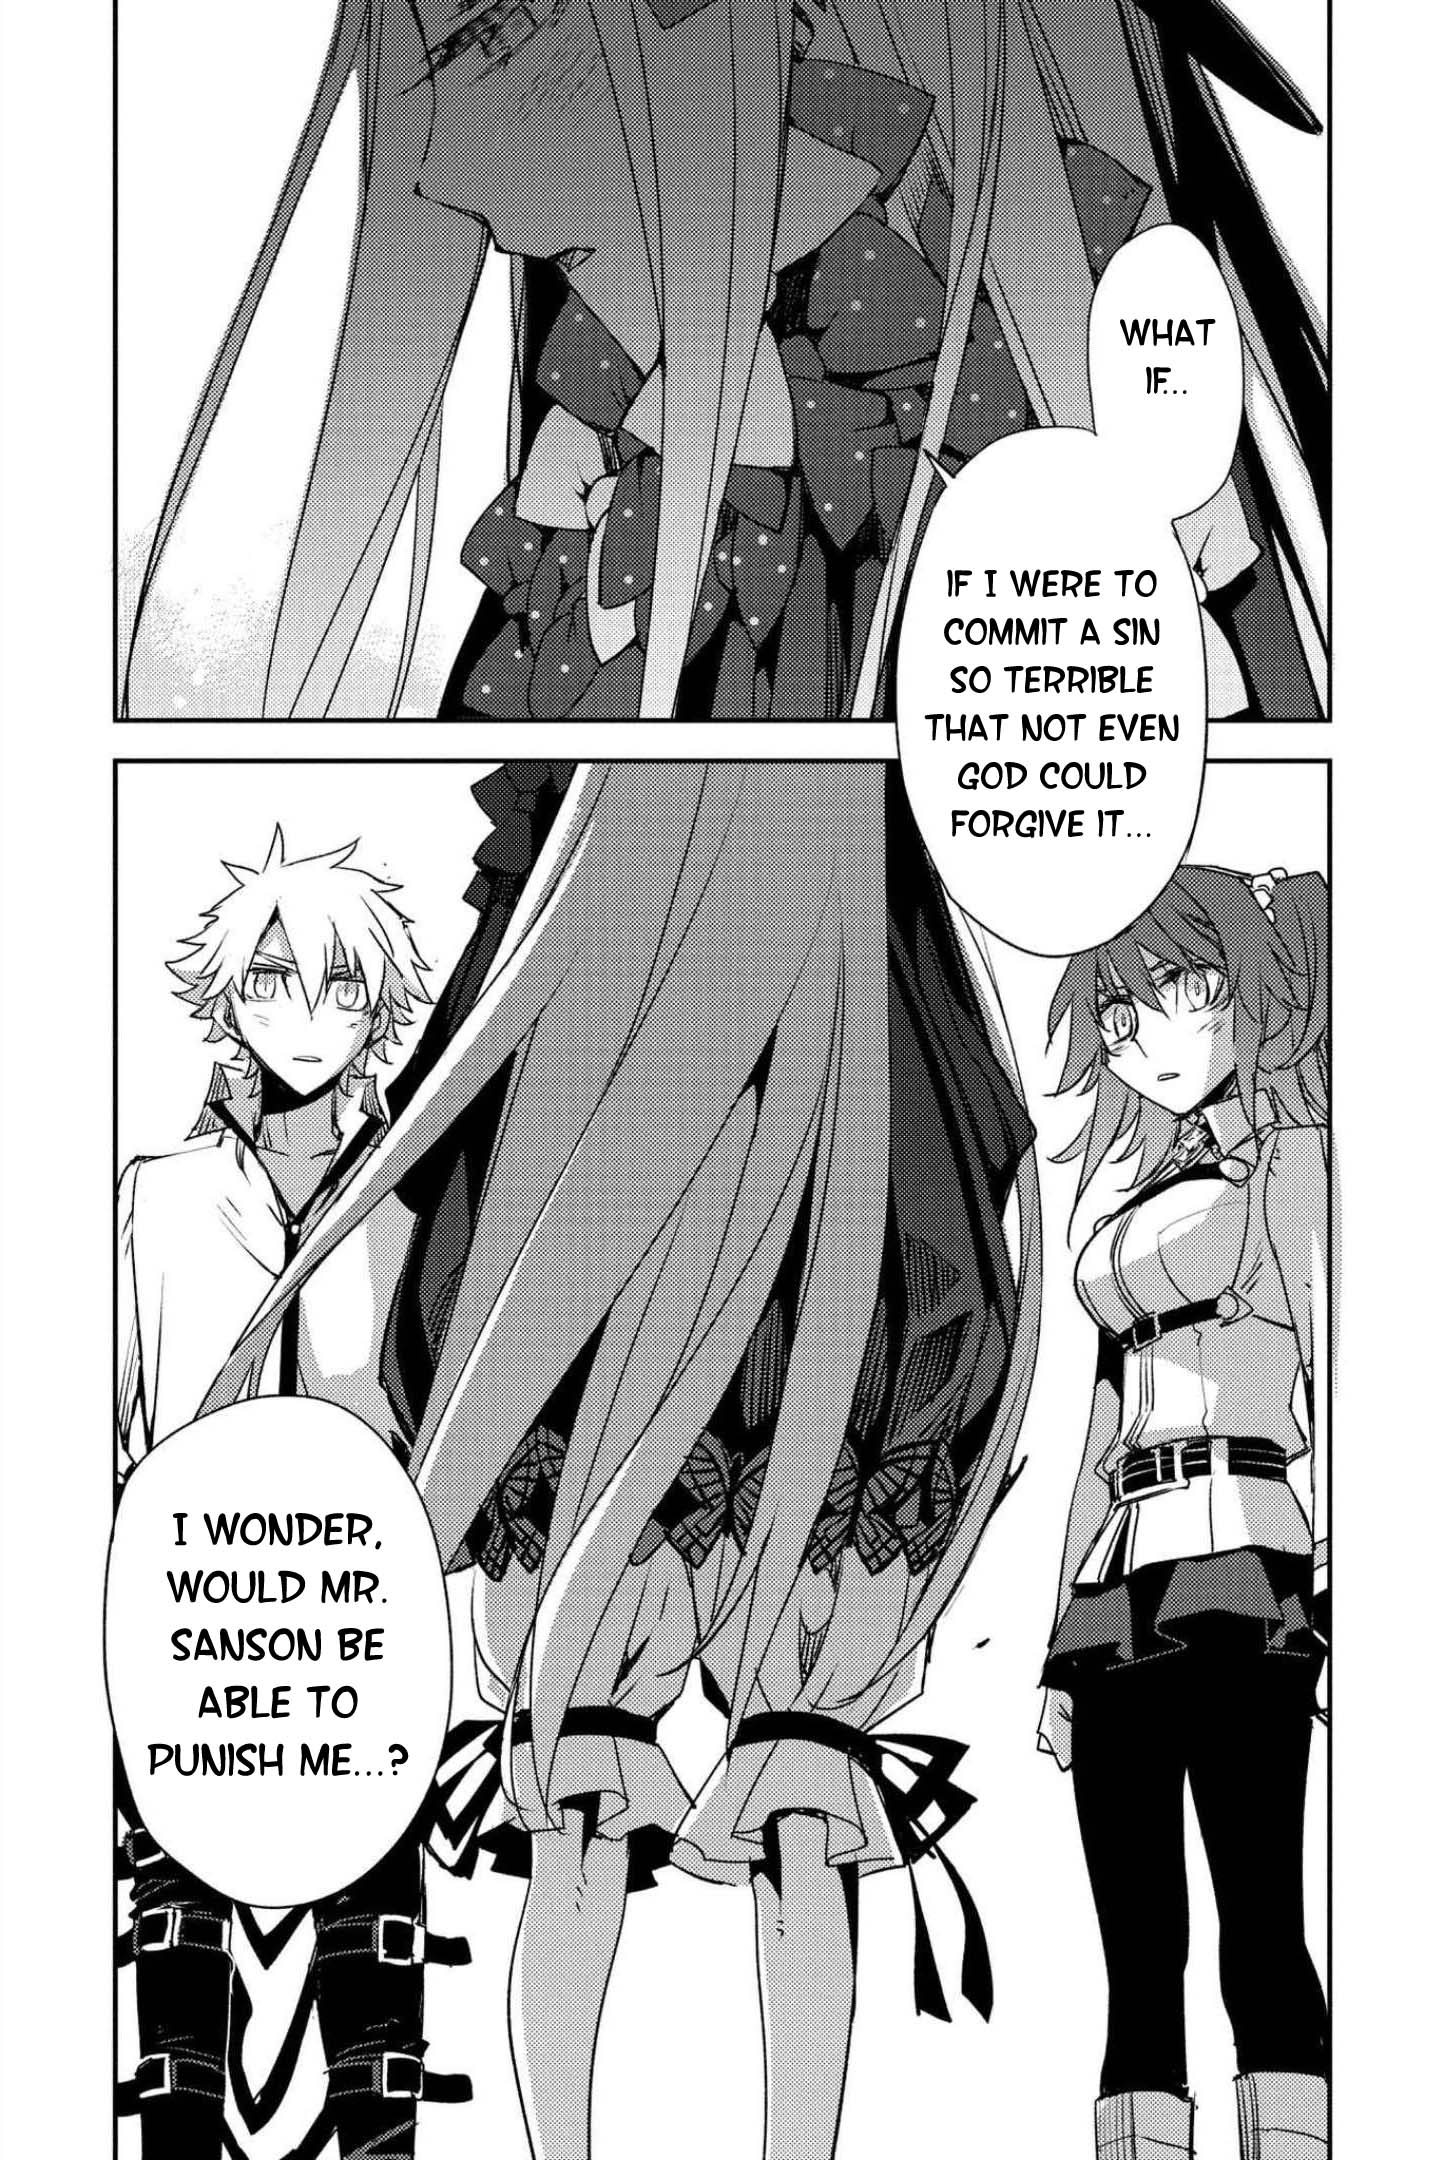 Fate/Grand Order: Epic of Remnant - Subspecies Singularity IV: Taboo Advent Salem: Salem of Heresy - chapter 24 - #5